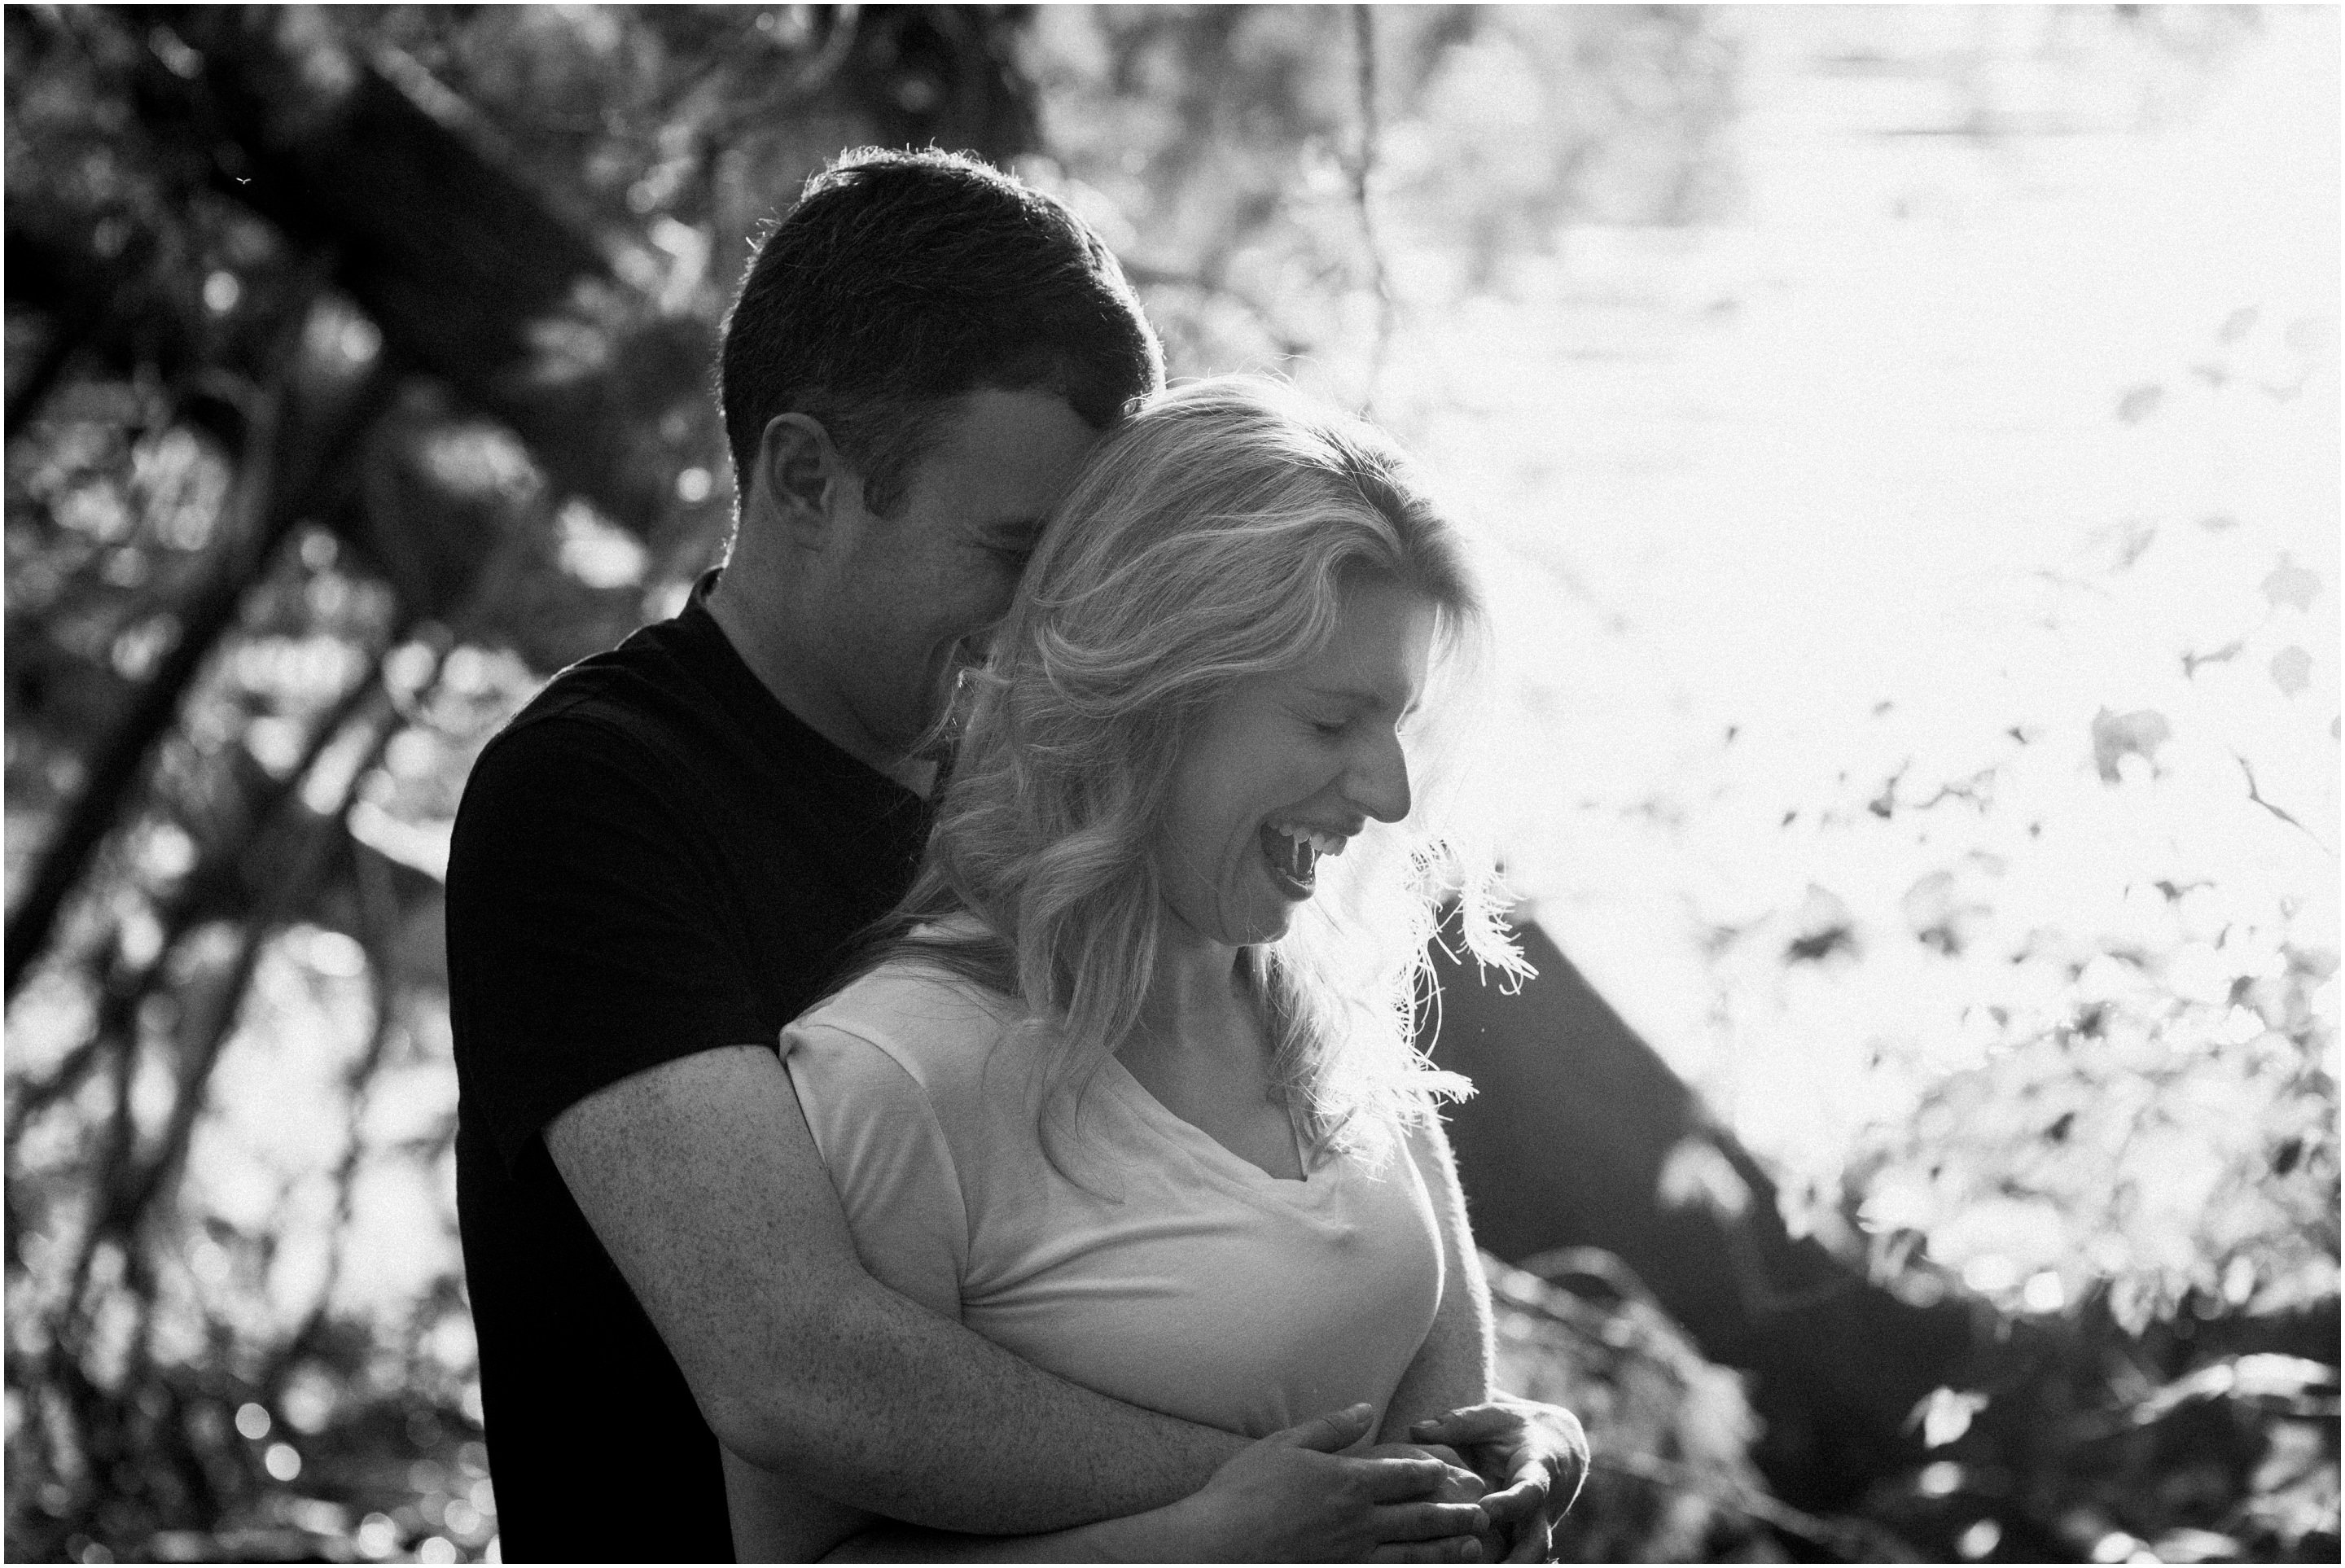 Shaw Woods Adventure Engagement Session - Cindy Lottes Photography